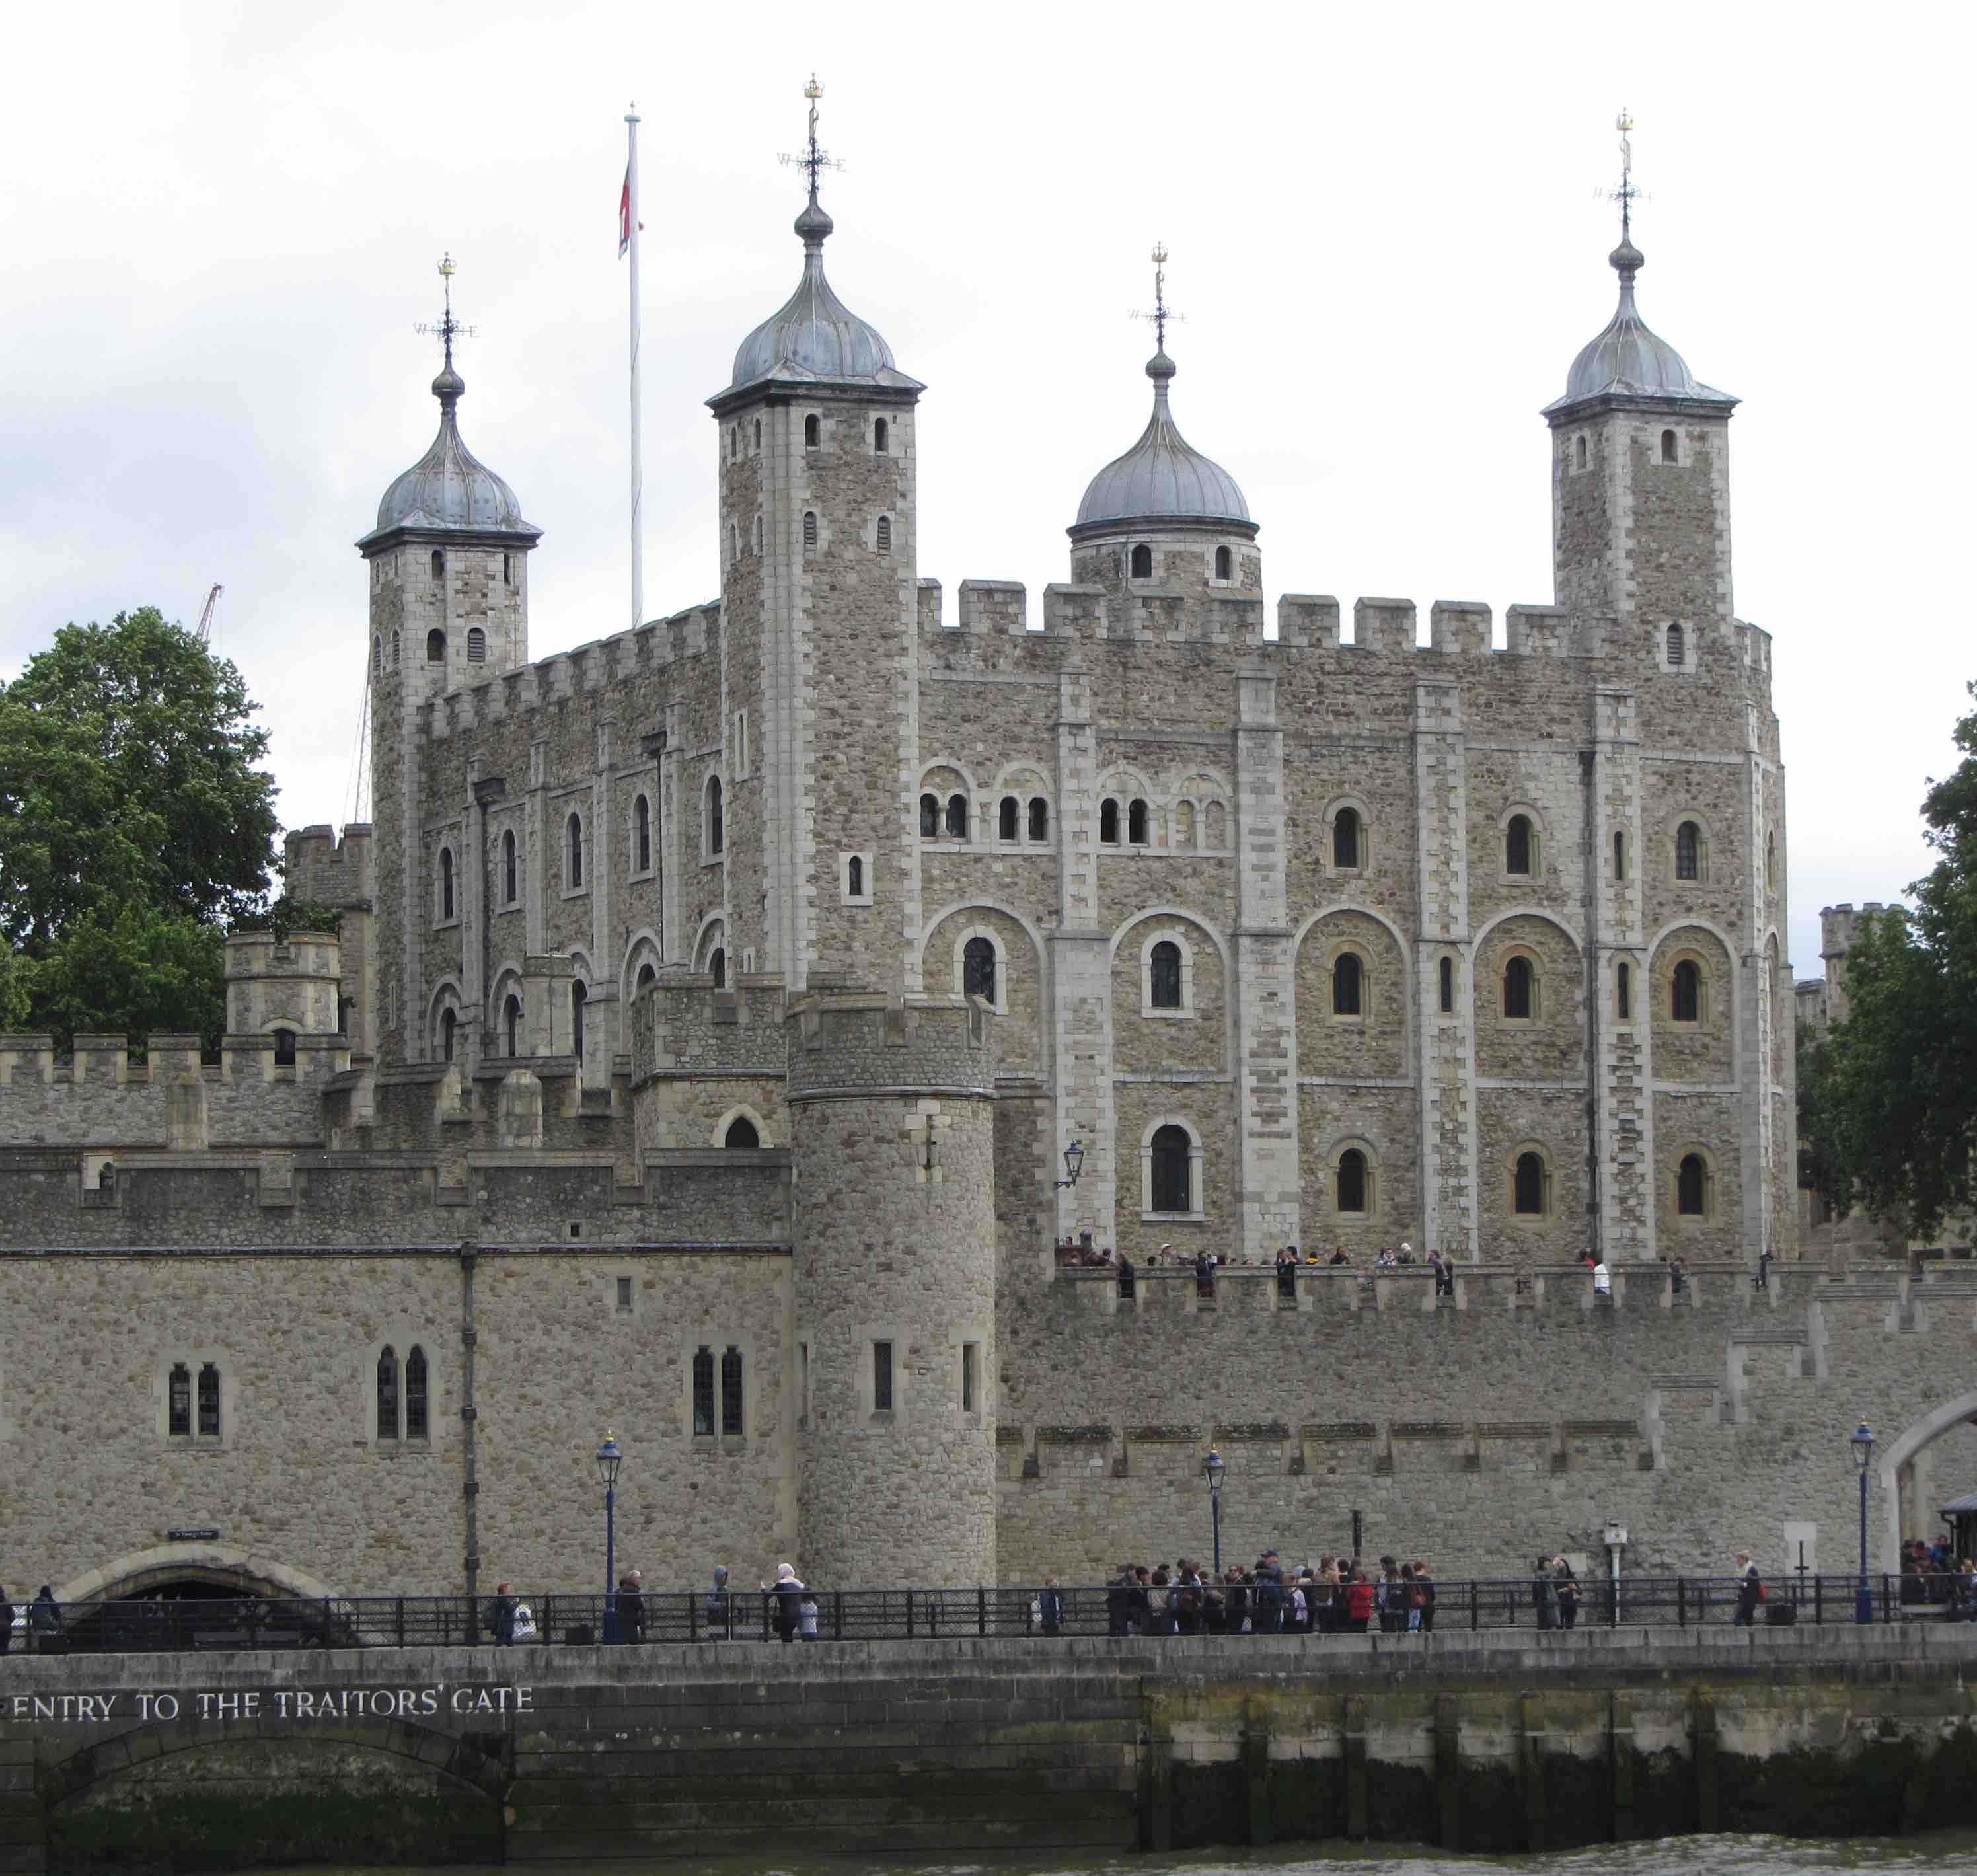 Cropped image of the Tower of London from the Thames River